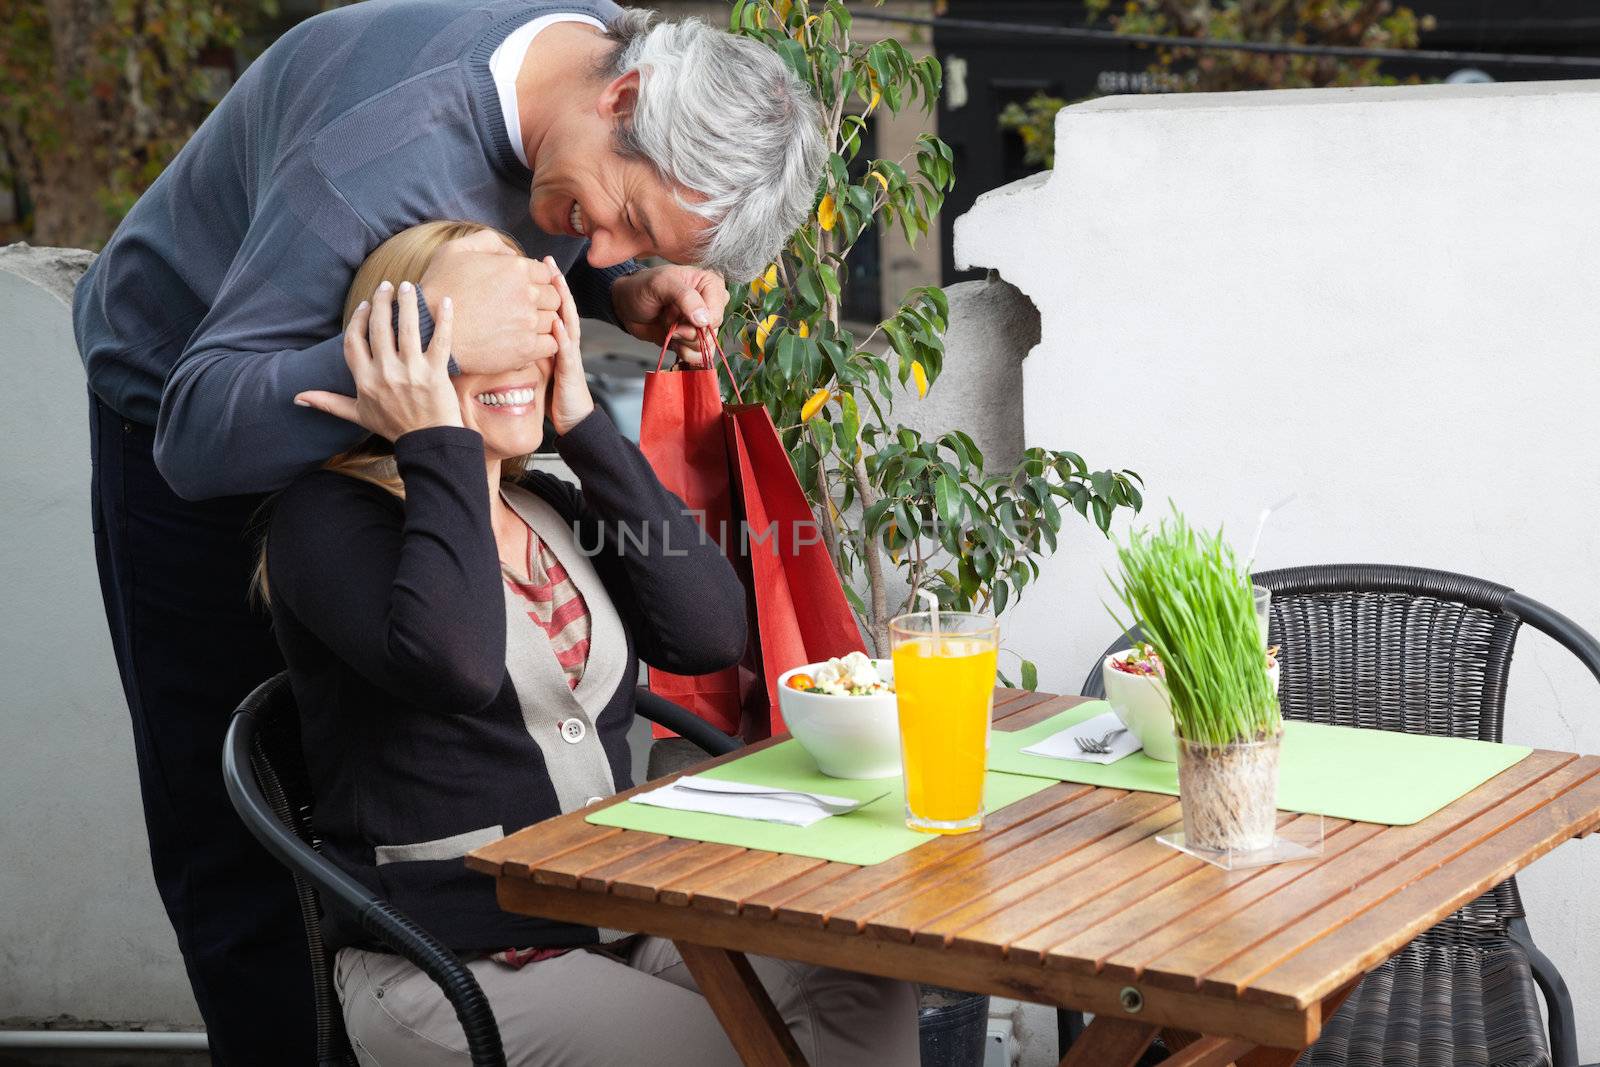 Middle aged man covering woman's eyes on breakfast table for surprise gift